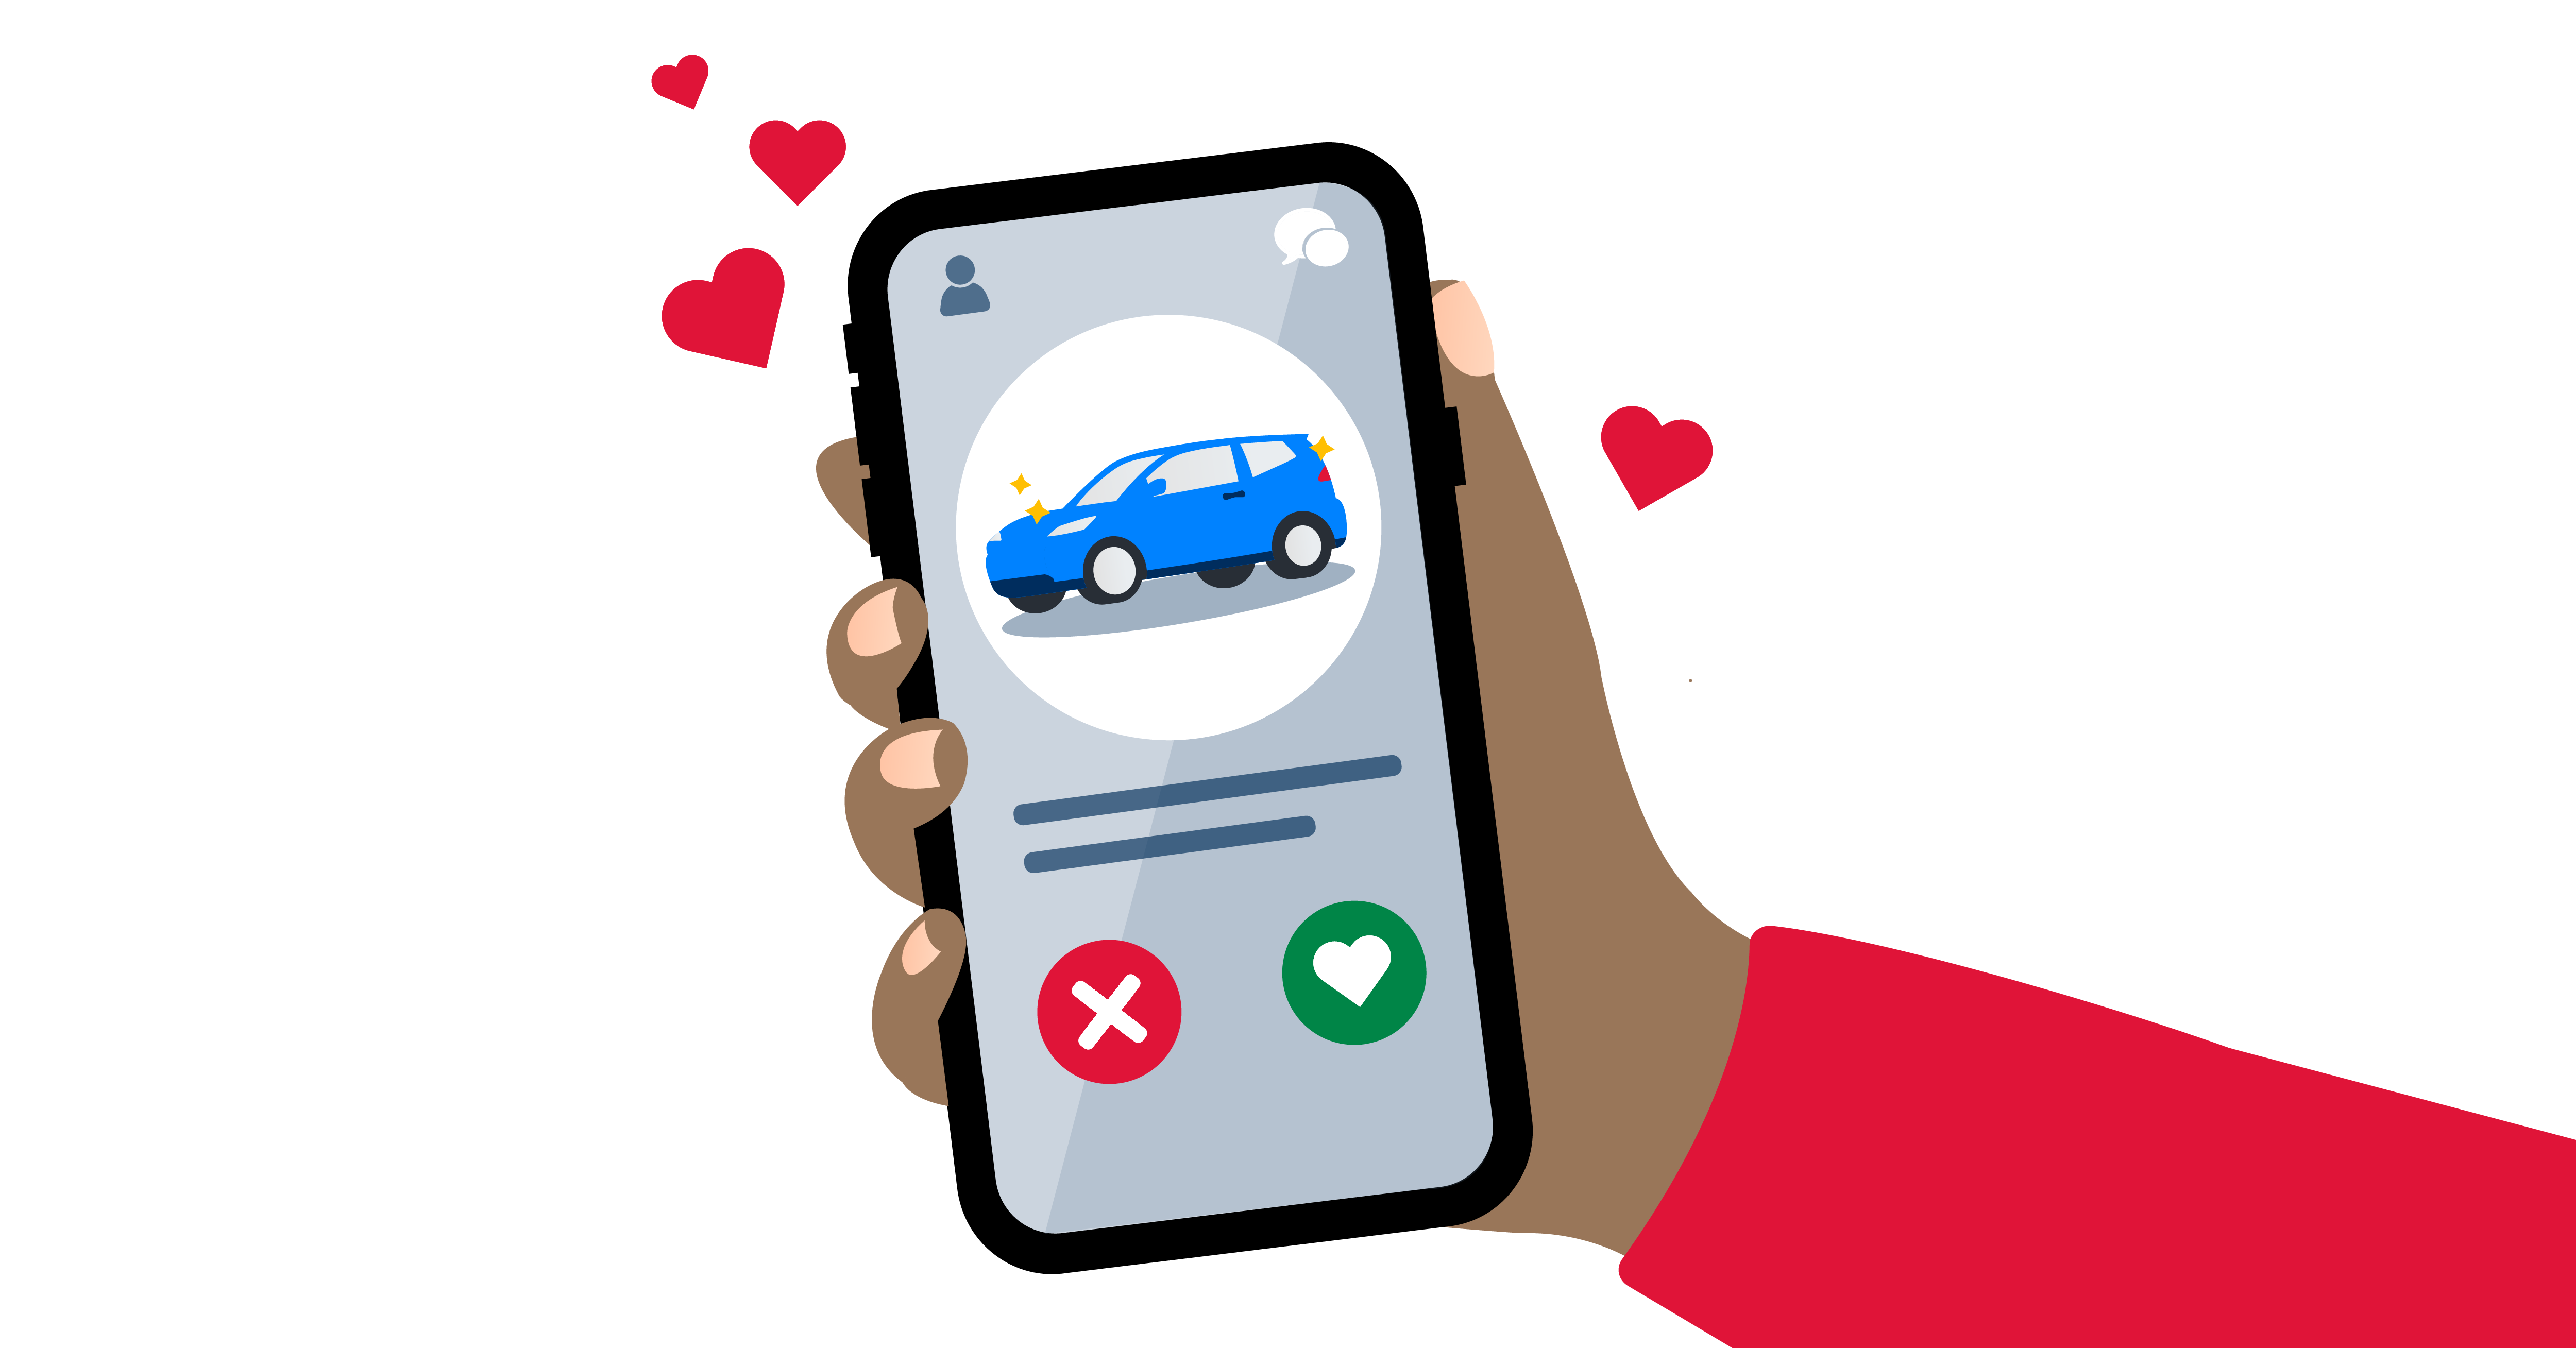 Find your Perfect Parking Match this Valentine’s Day